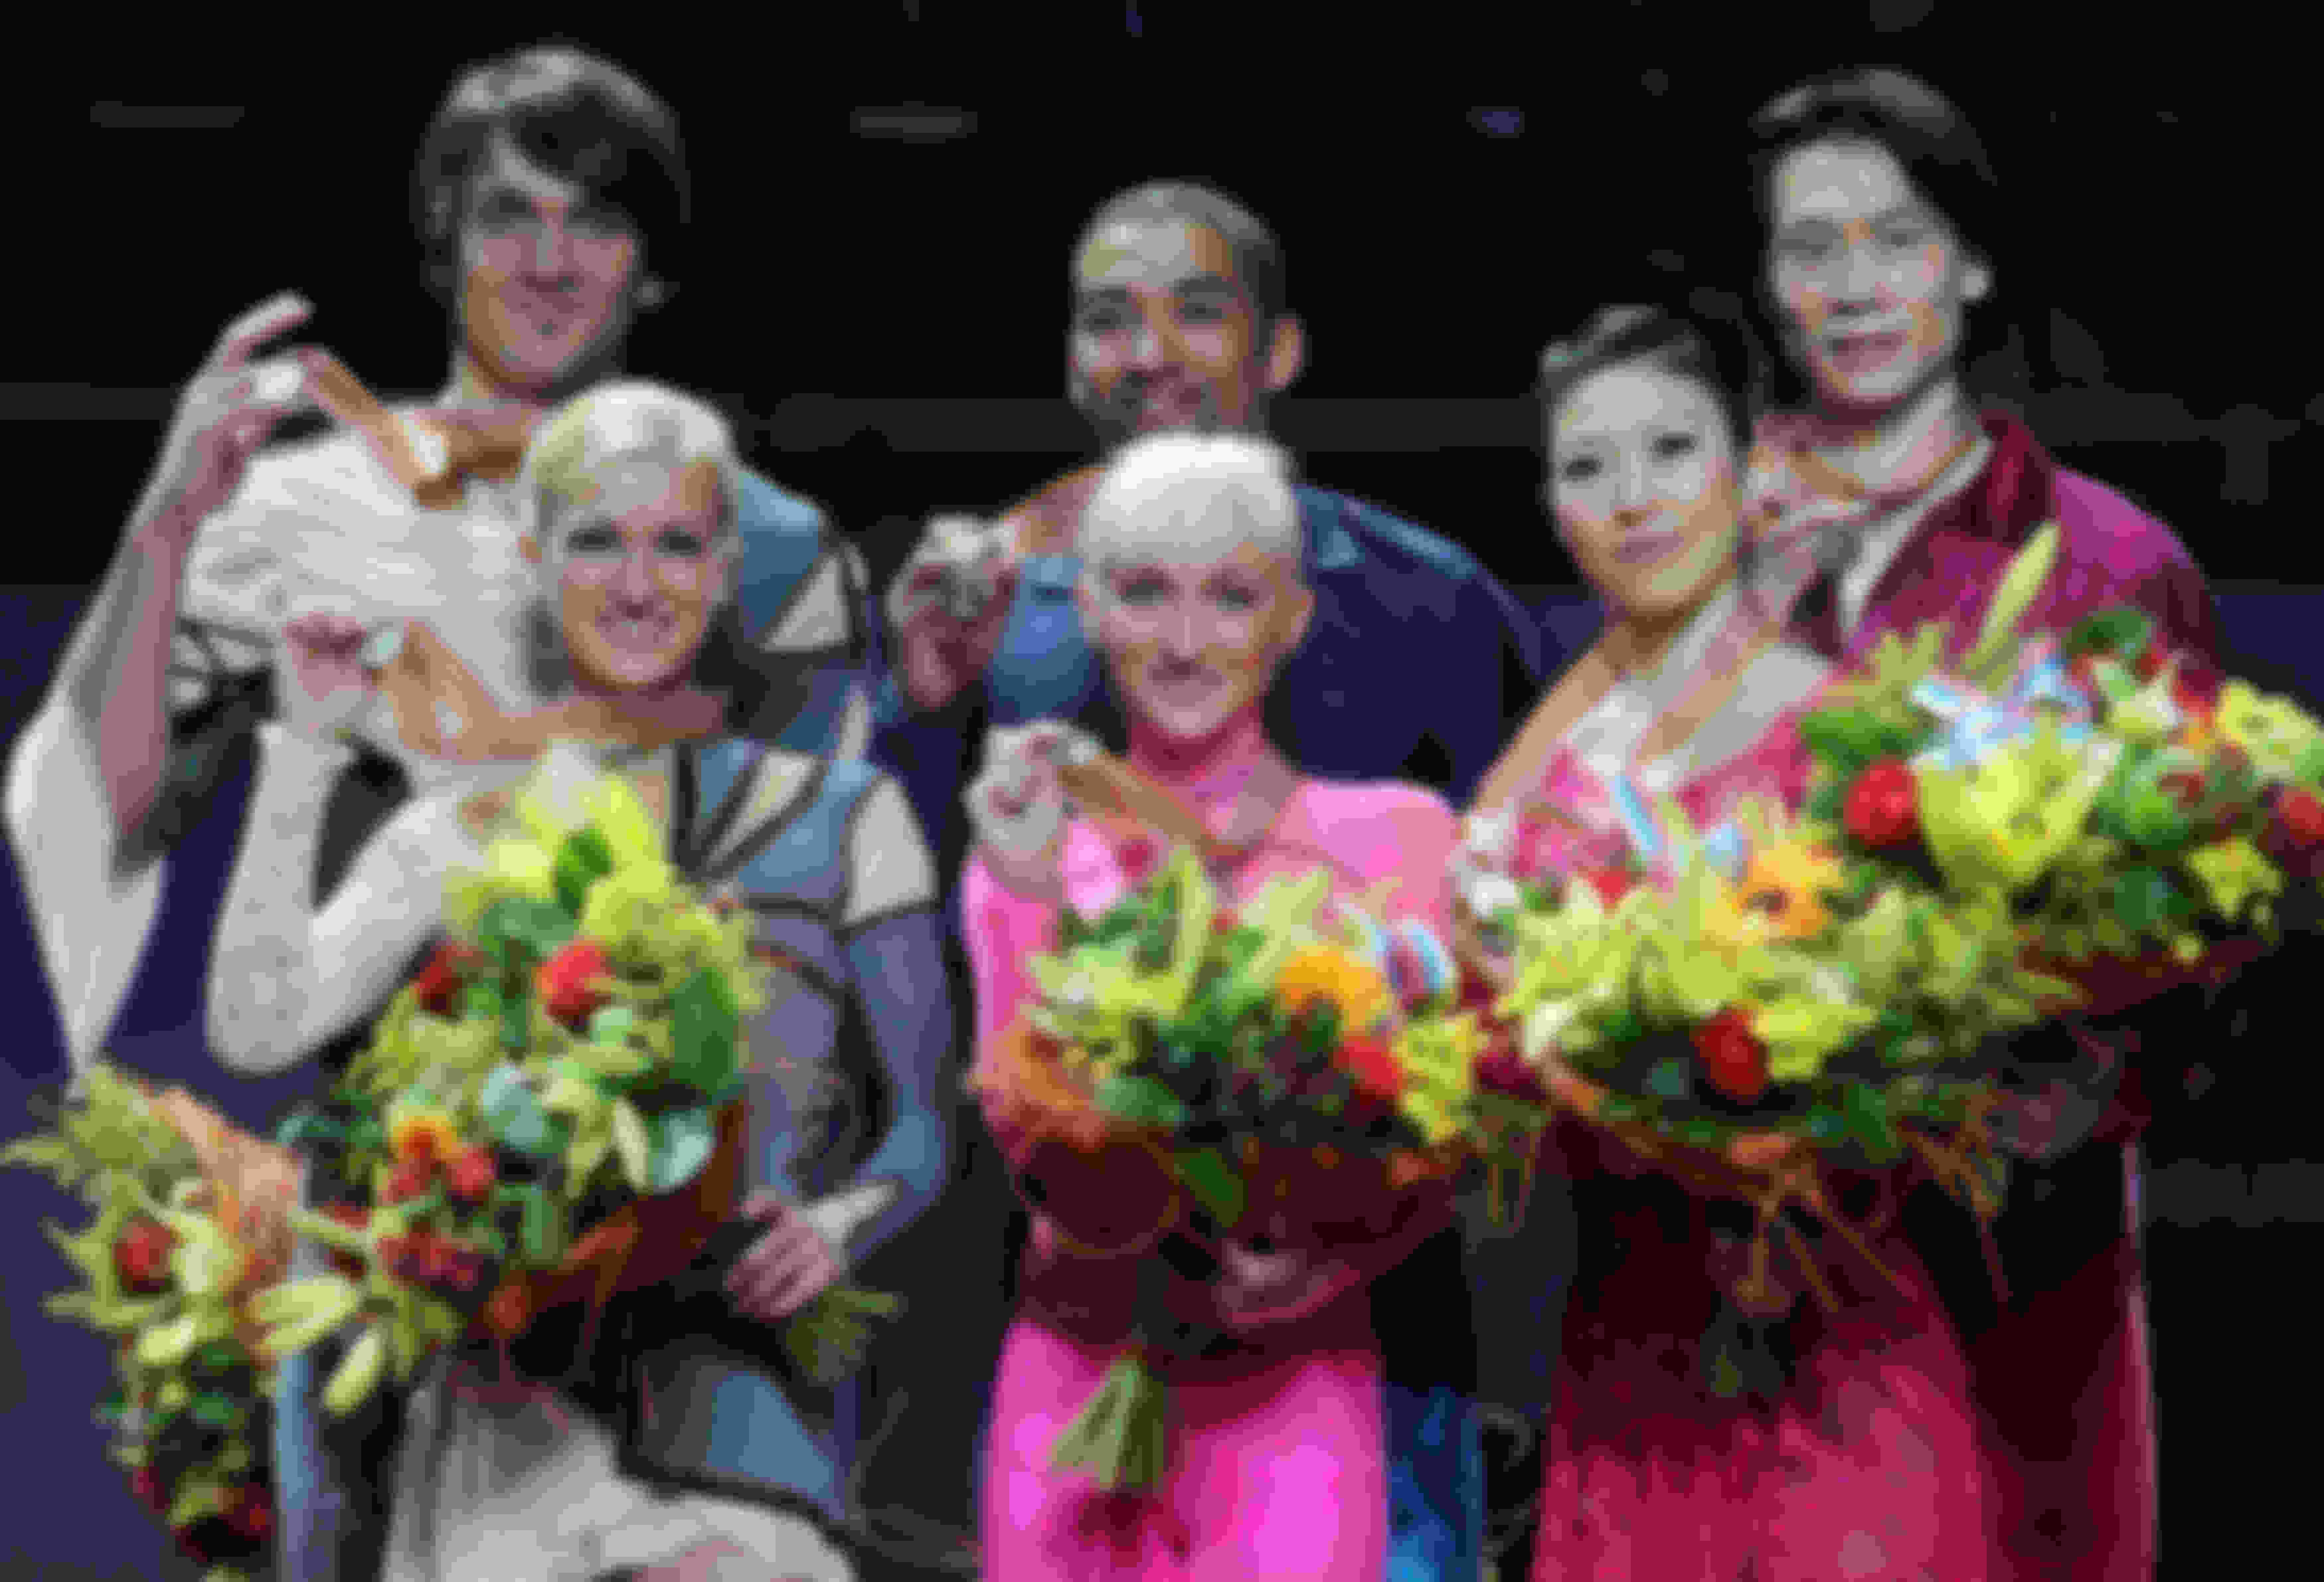 Aliona Savchenko and Robin Szolkowy (C), Tatiana Volosozhar and Maxim Trankov (L) and Pang Qing and Tong Jian stand on the podium at the World Championships in 2011